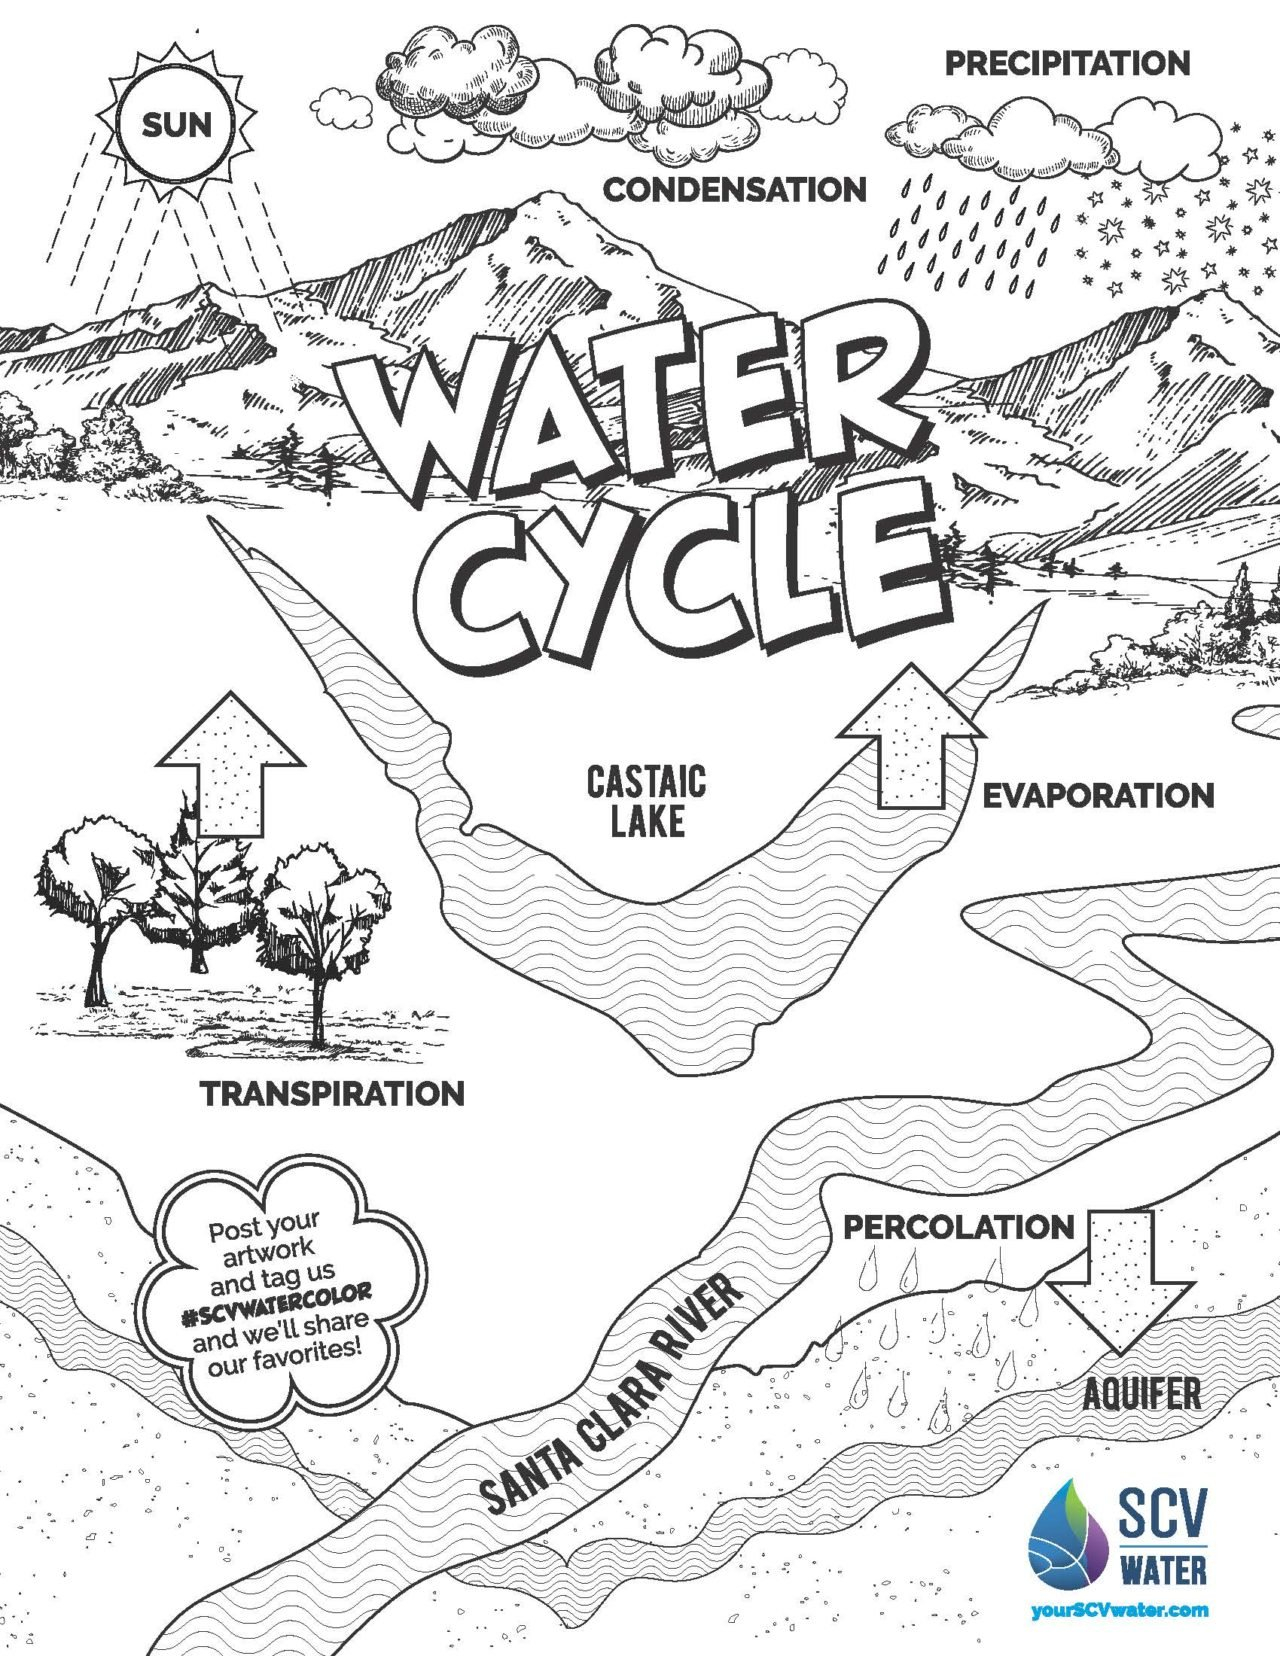 water-cycle-coloring-page-scv-water-waterrebate